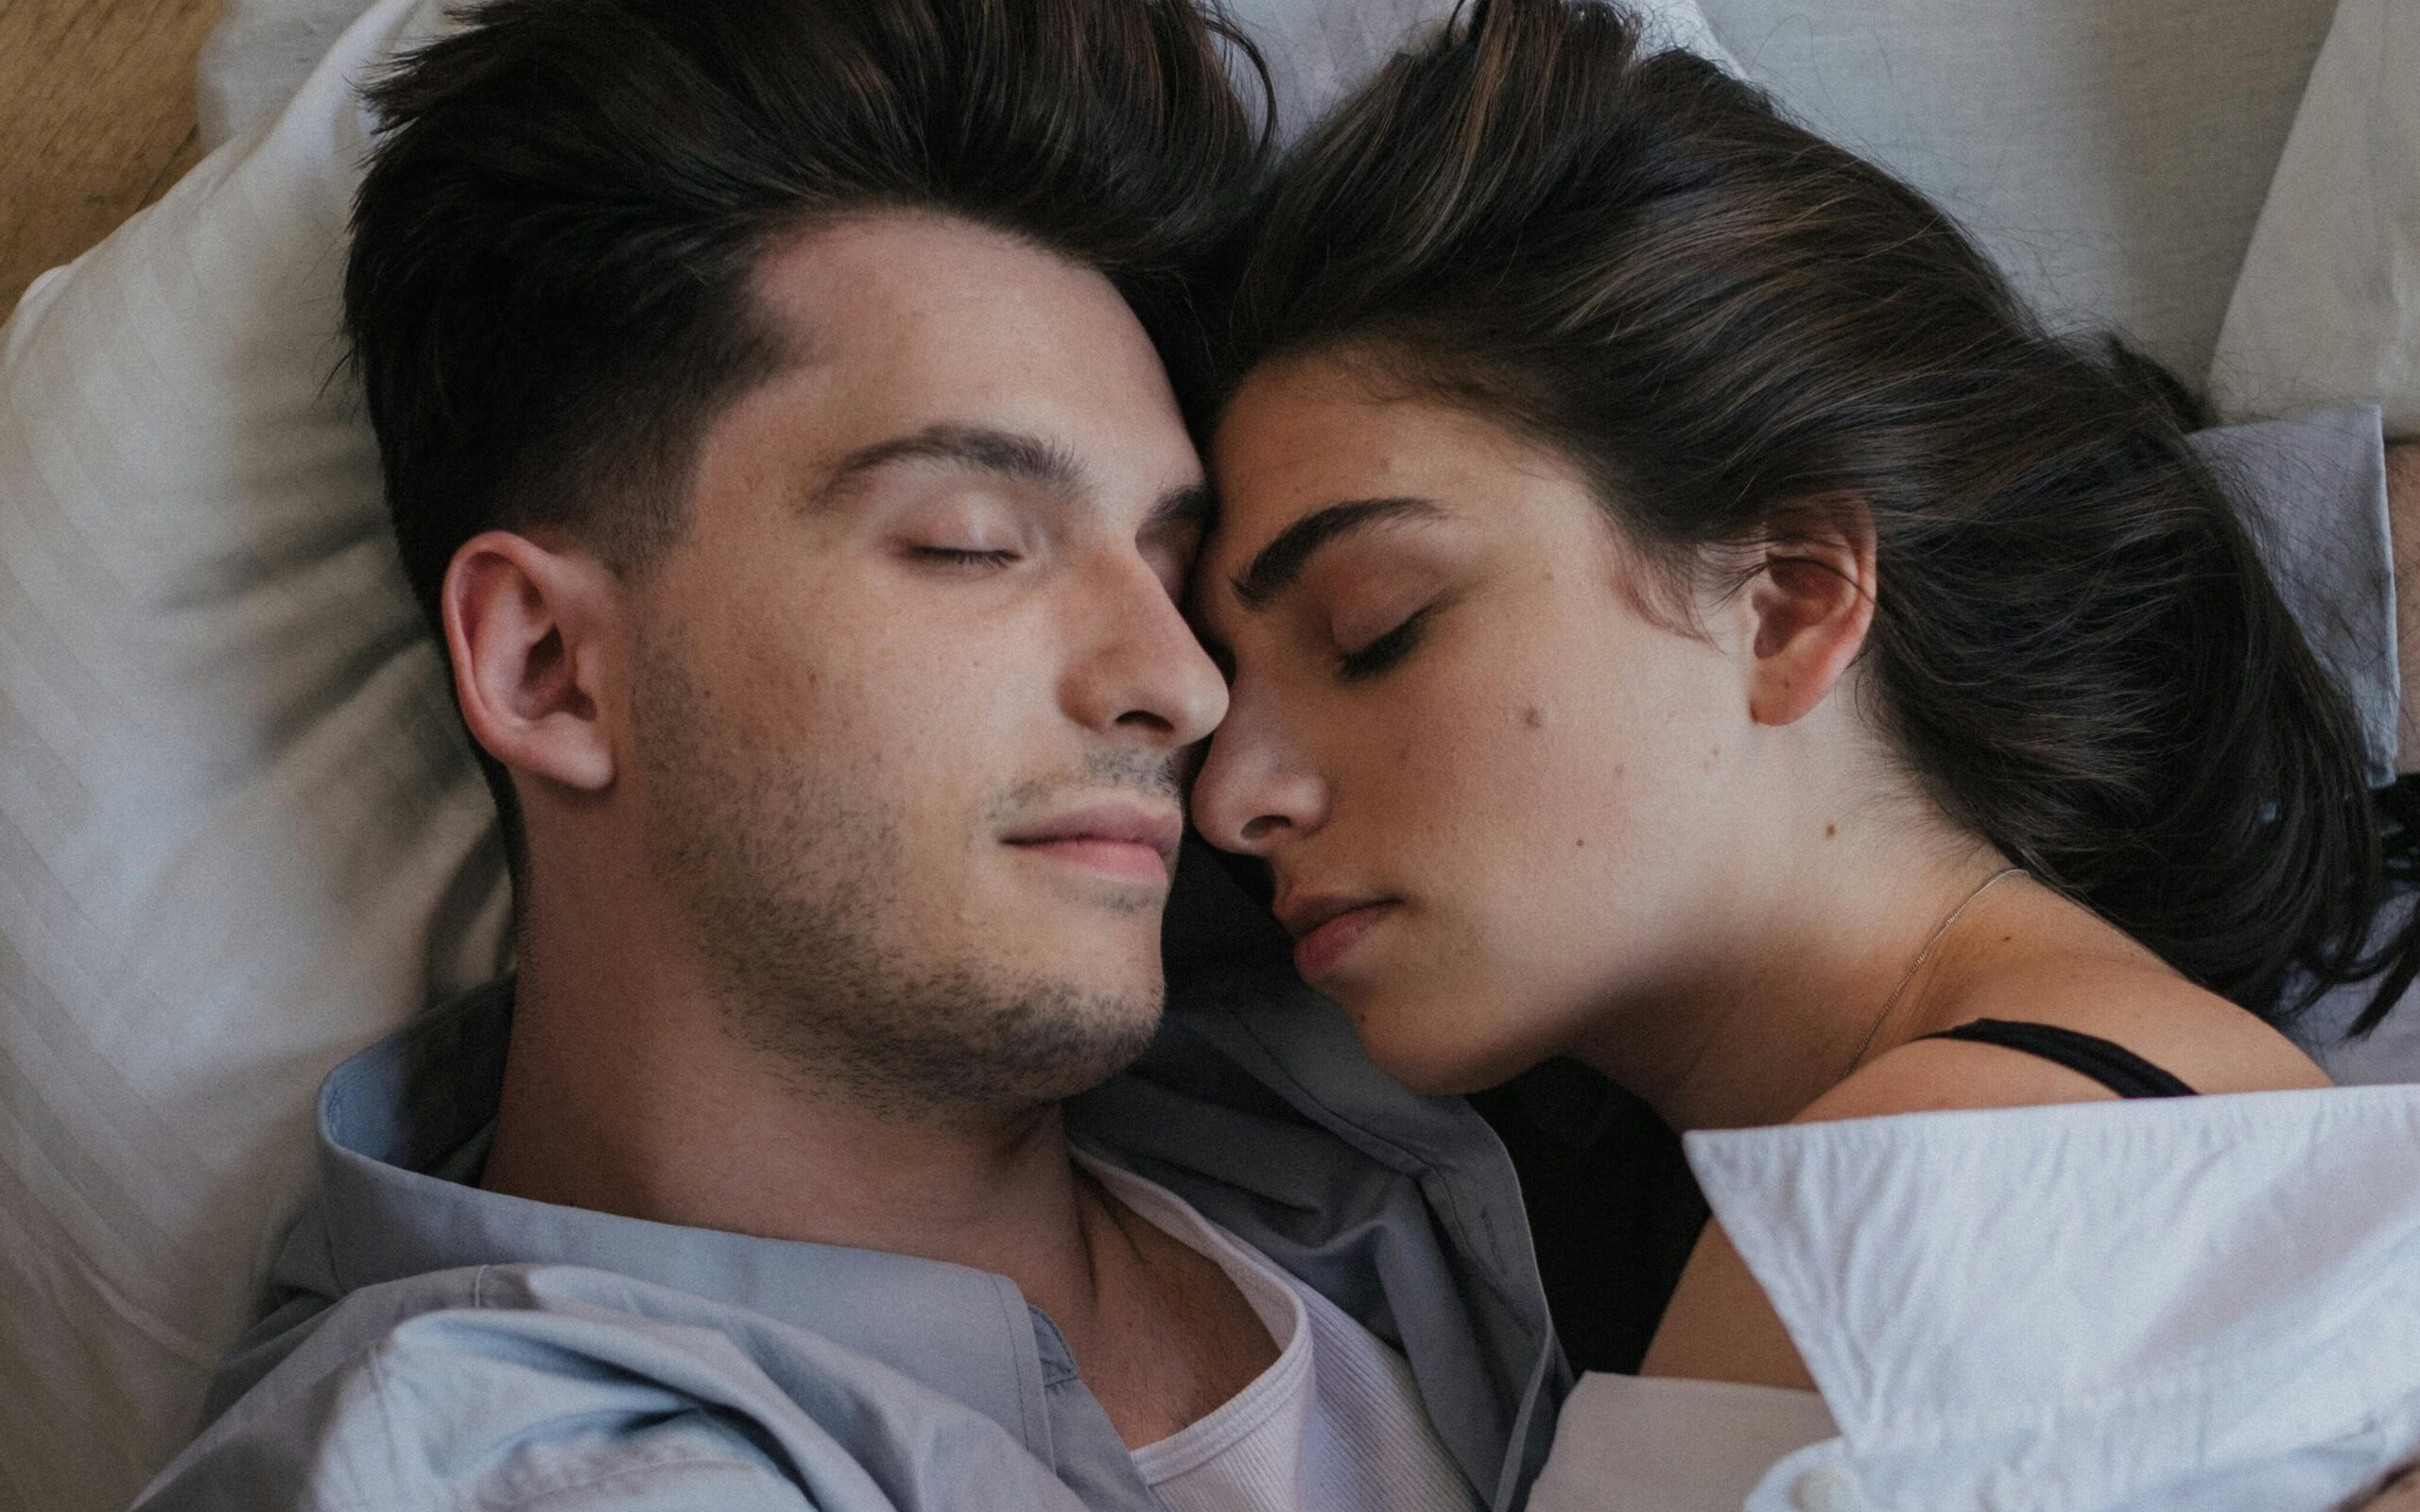 12 Common Couple Sleeping Positions And What They Mean